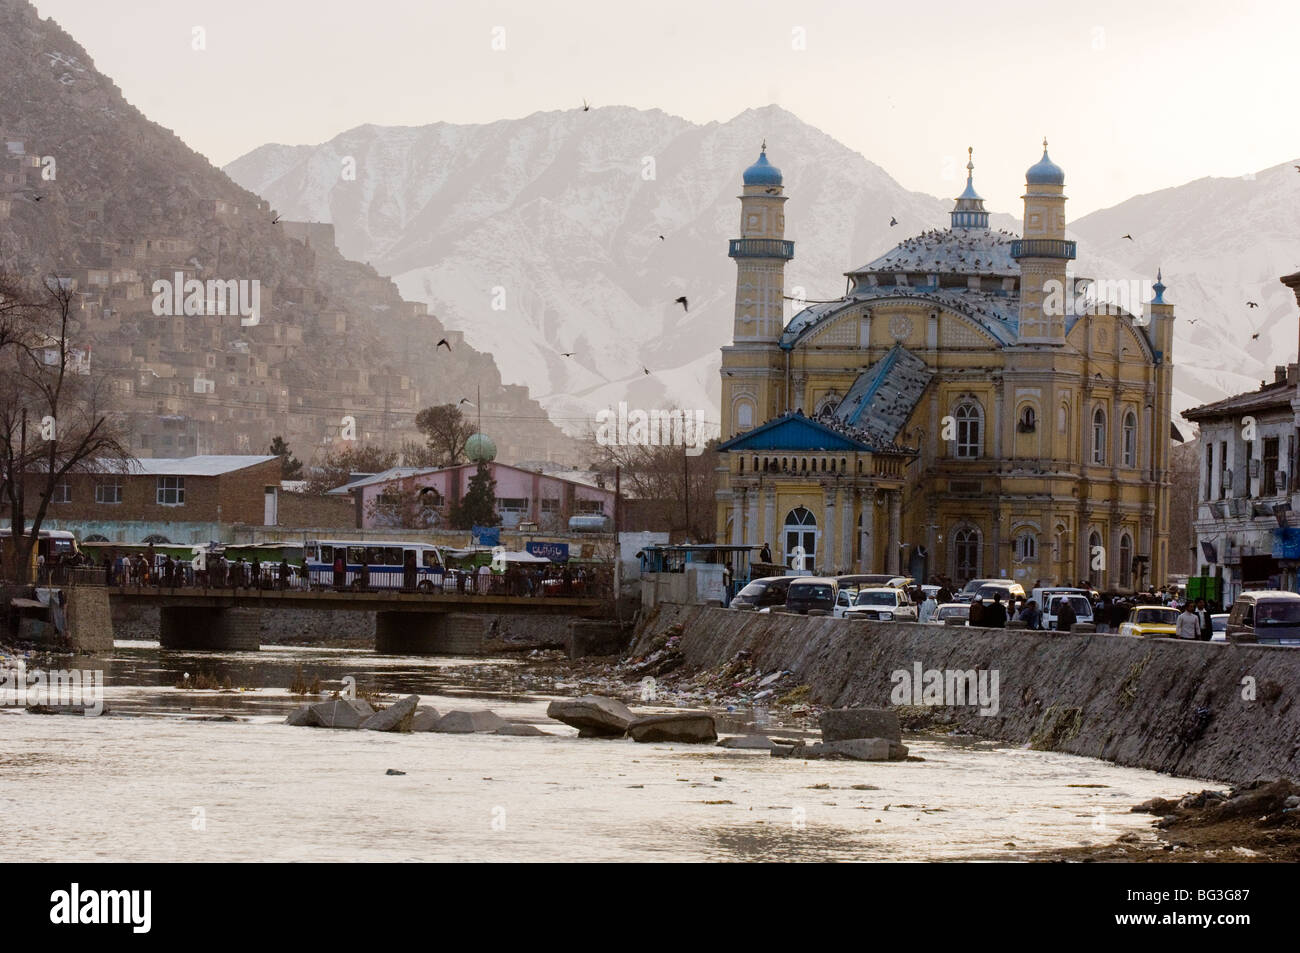 Shah-Do Shamshira Mosque is a yellow two-story mosque in Kabul, just off the Kabul River Kabul , Afghanistan. Stock Photo